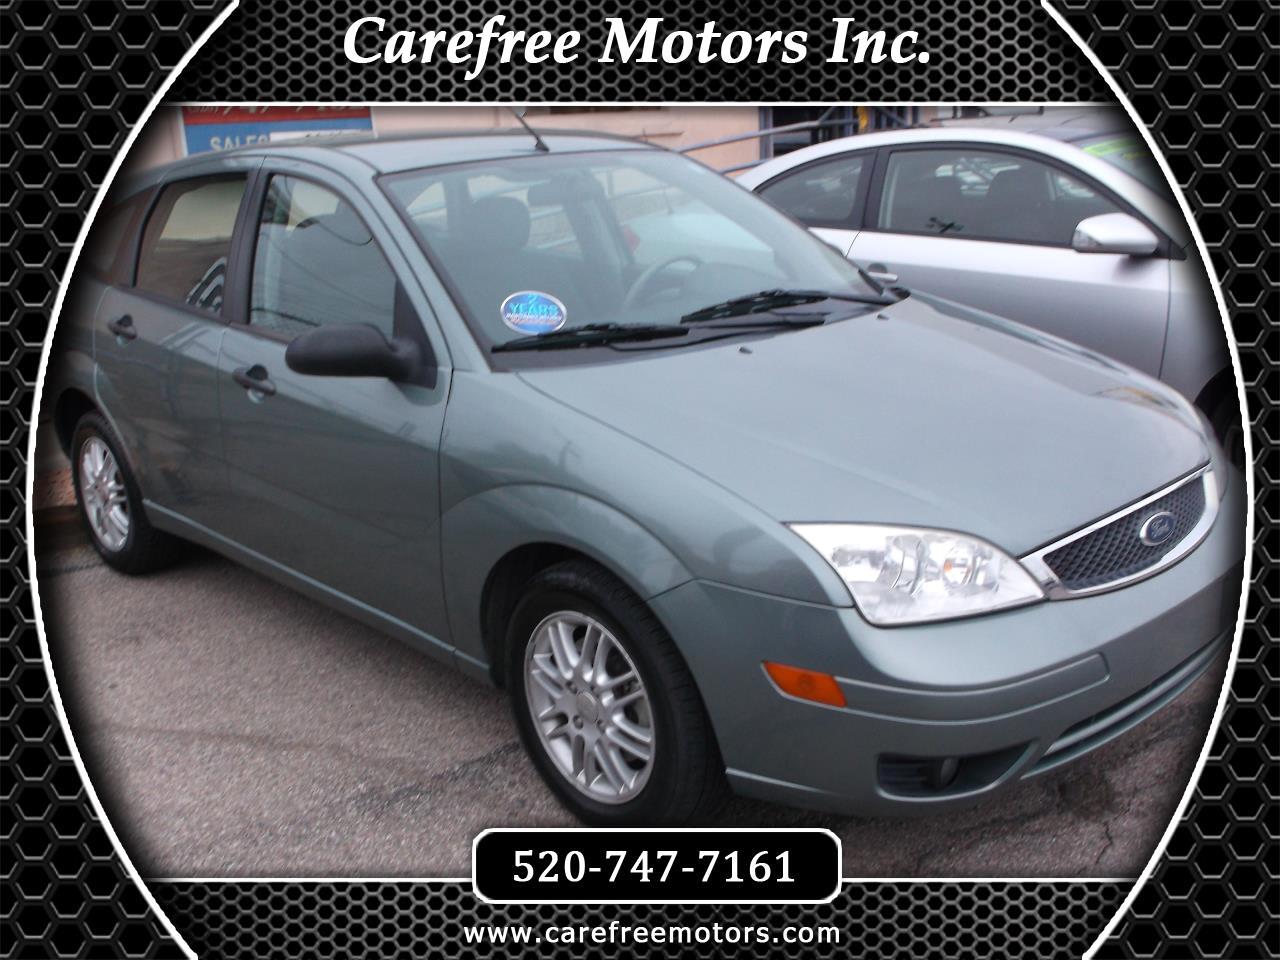 Used 2005 Ford Focus Zx5 Se For Sale In Tucson Az 85710